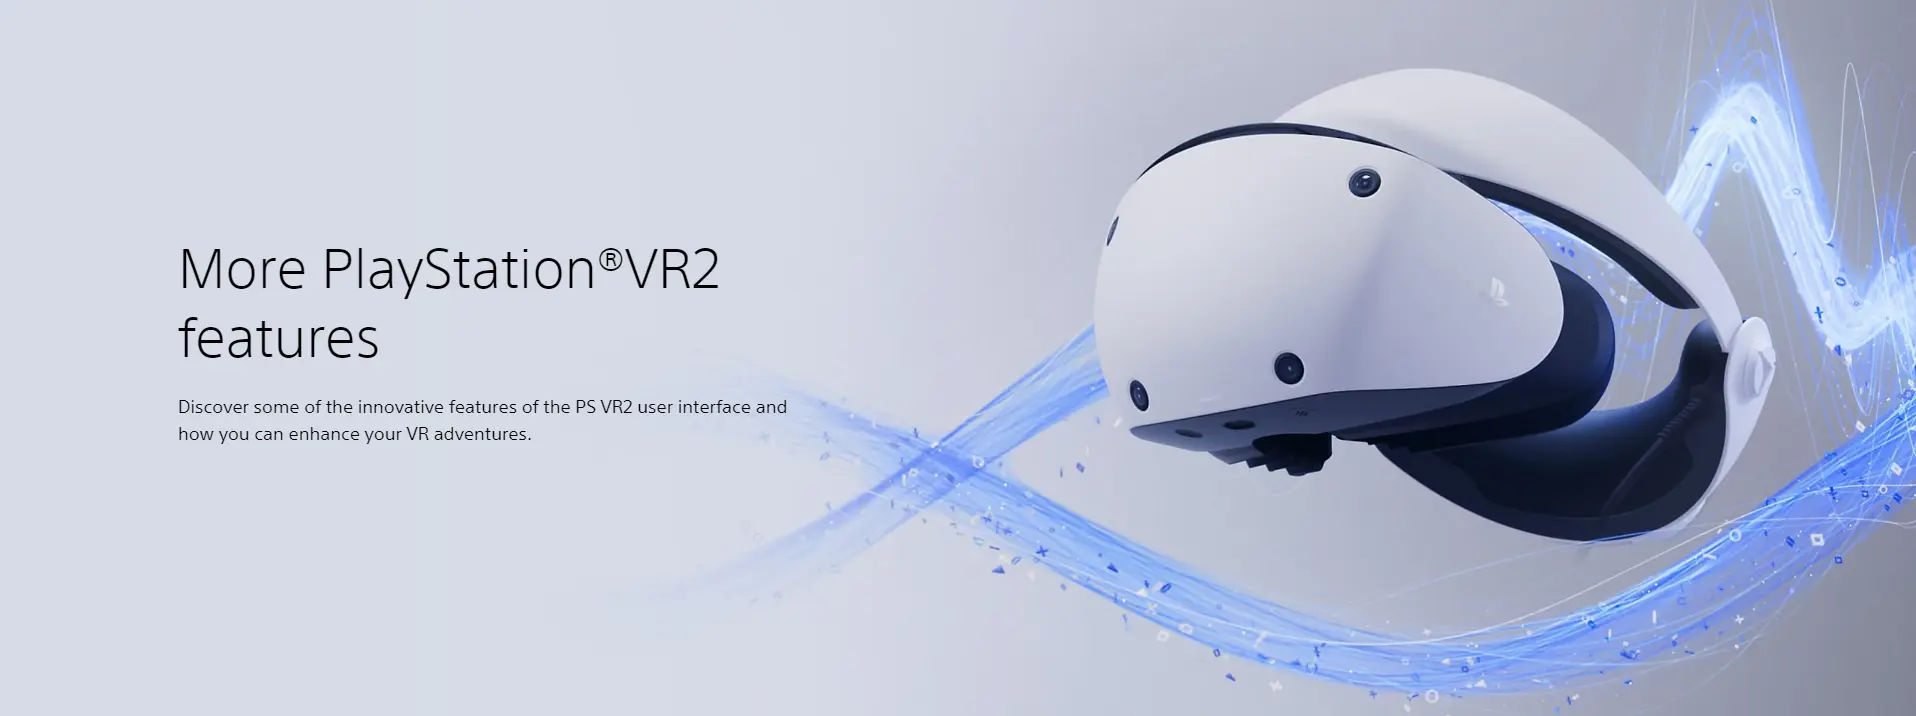 PS VR2 features PS VR2 UI